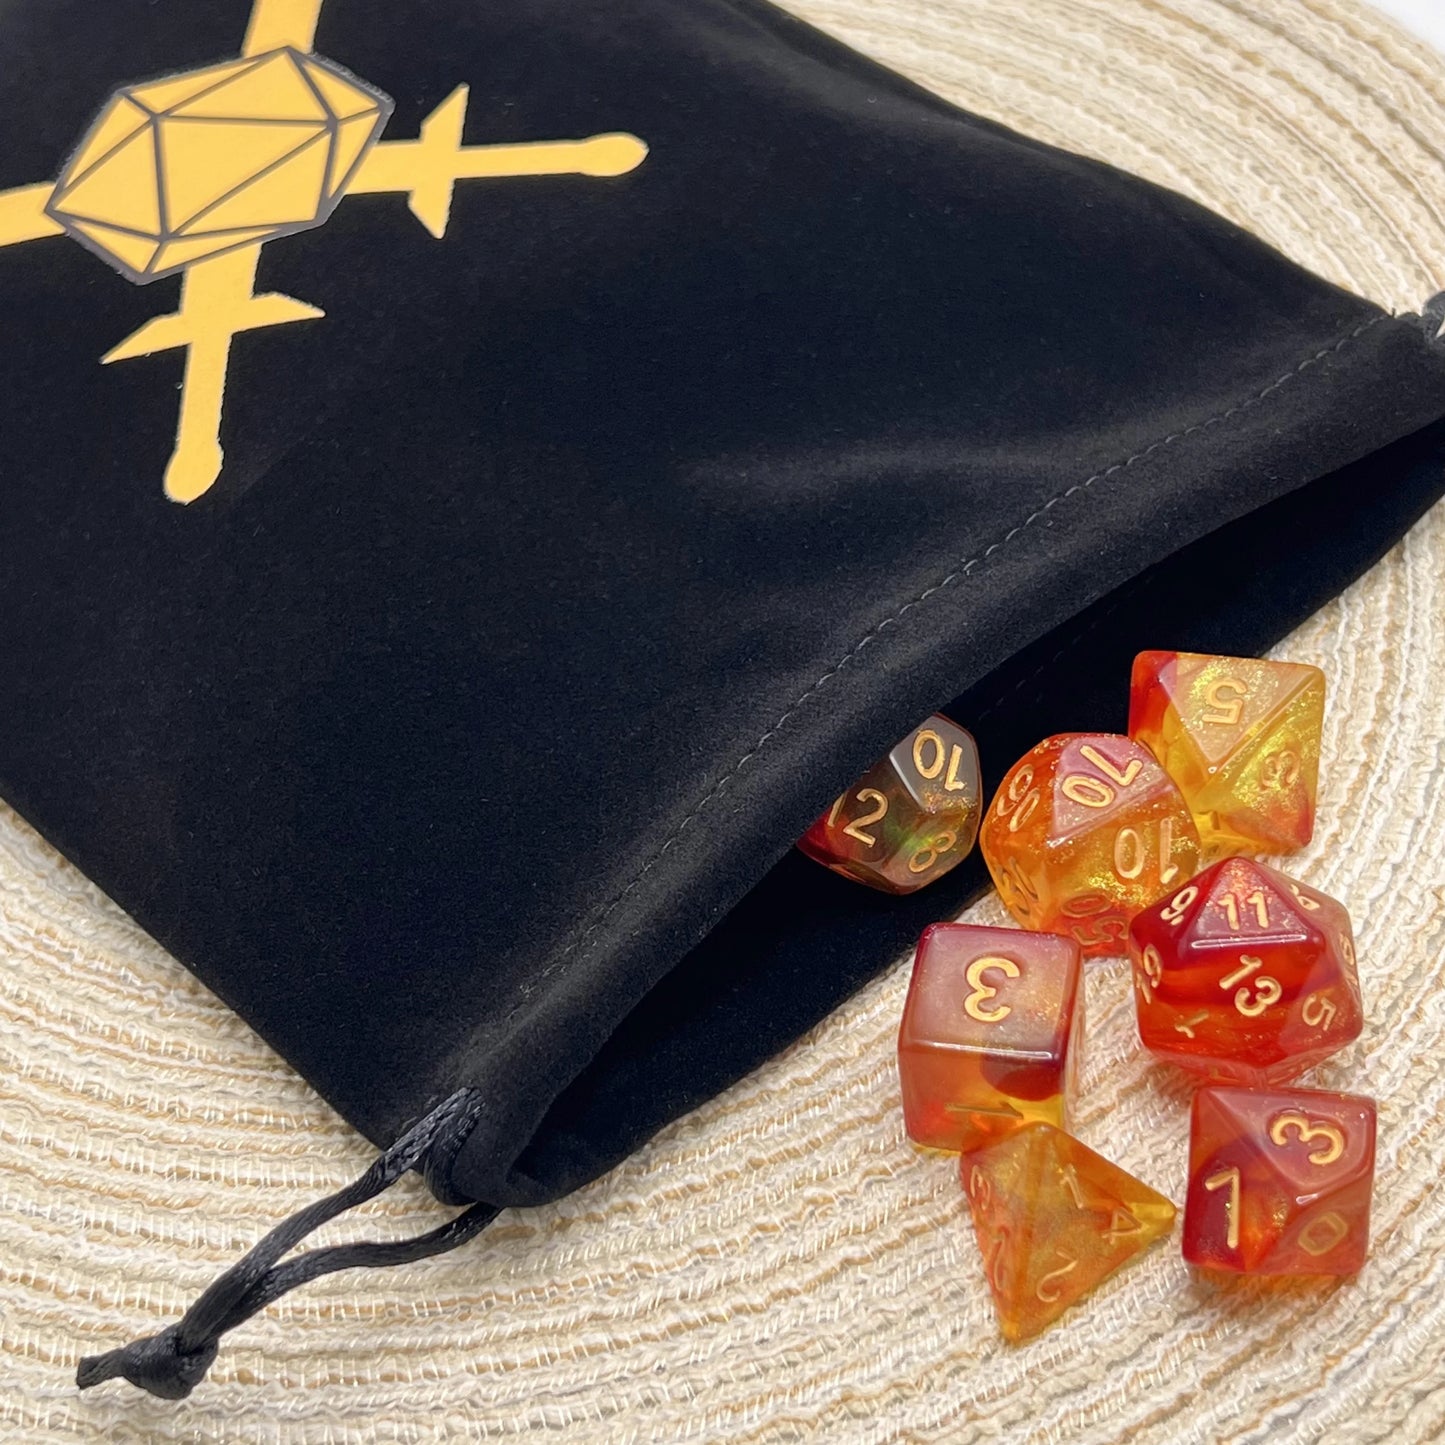 1PCS Dice Bag I Velvet Drawstring Pouch Ideal Size for Tarot Oracle Cards Dungeons and Dragons Accessories Runes Jewelry